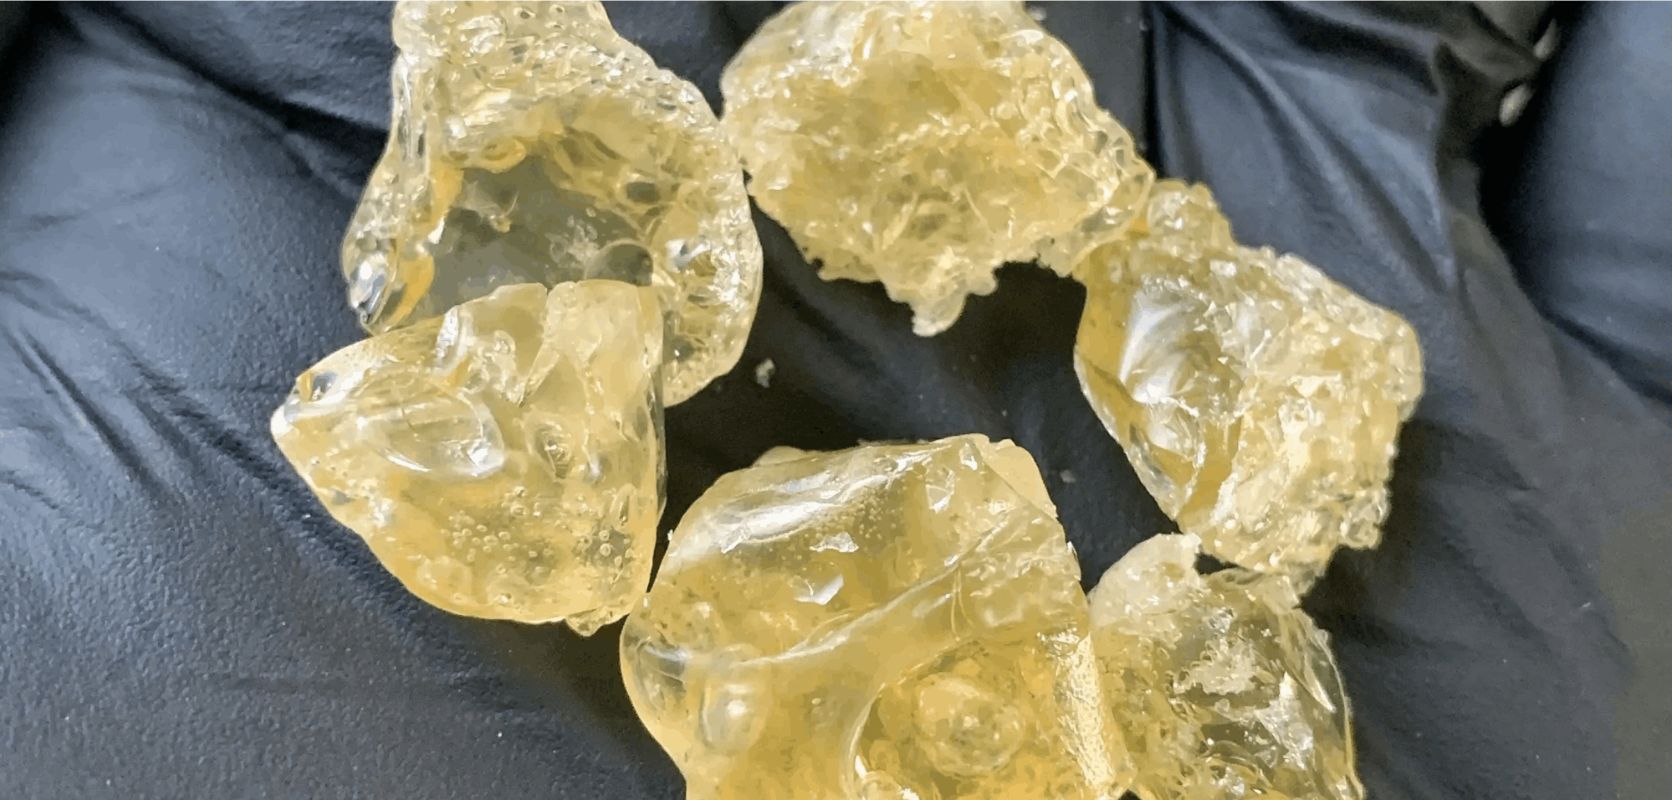 Cannabis diamonds are a type of concentrated cannabis product that typically have a high THC content. 